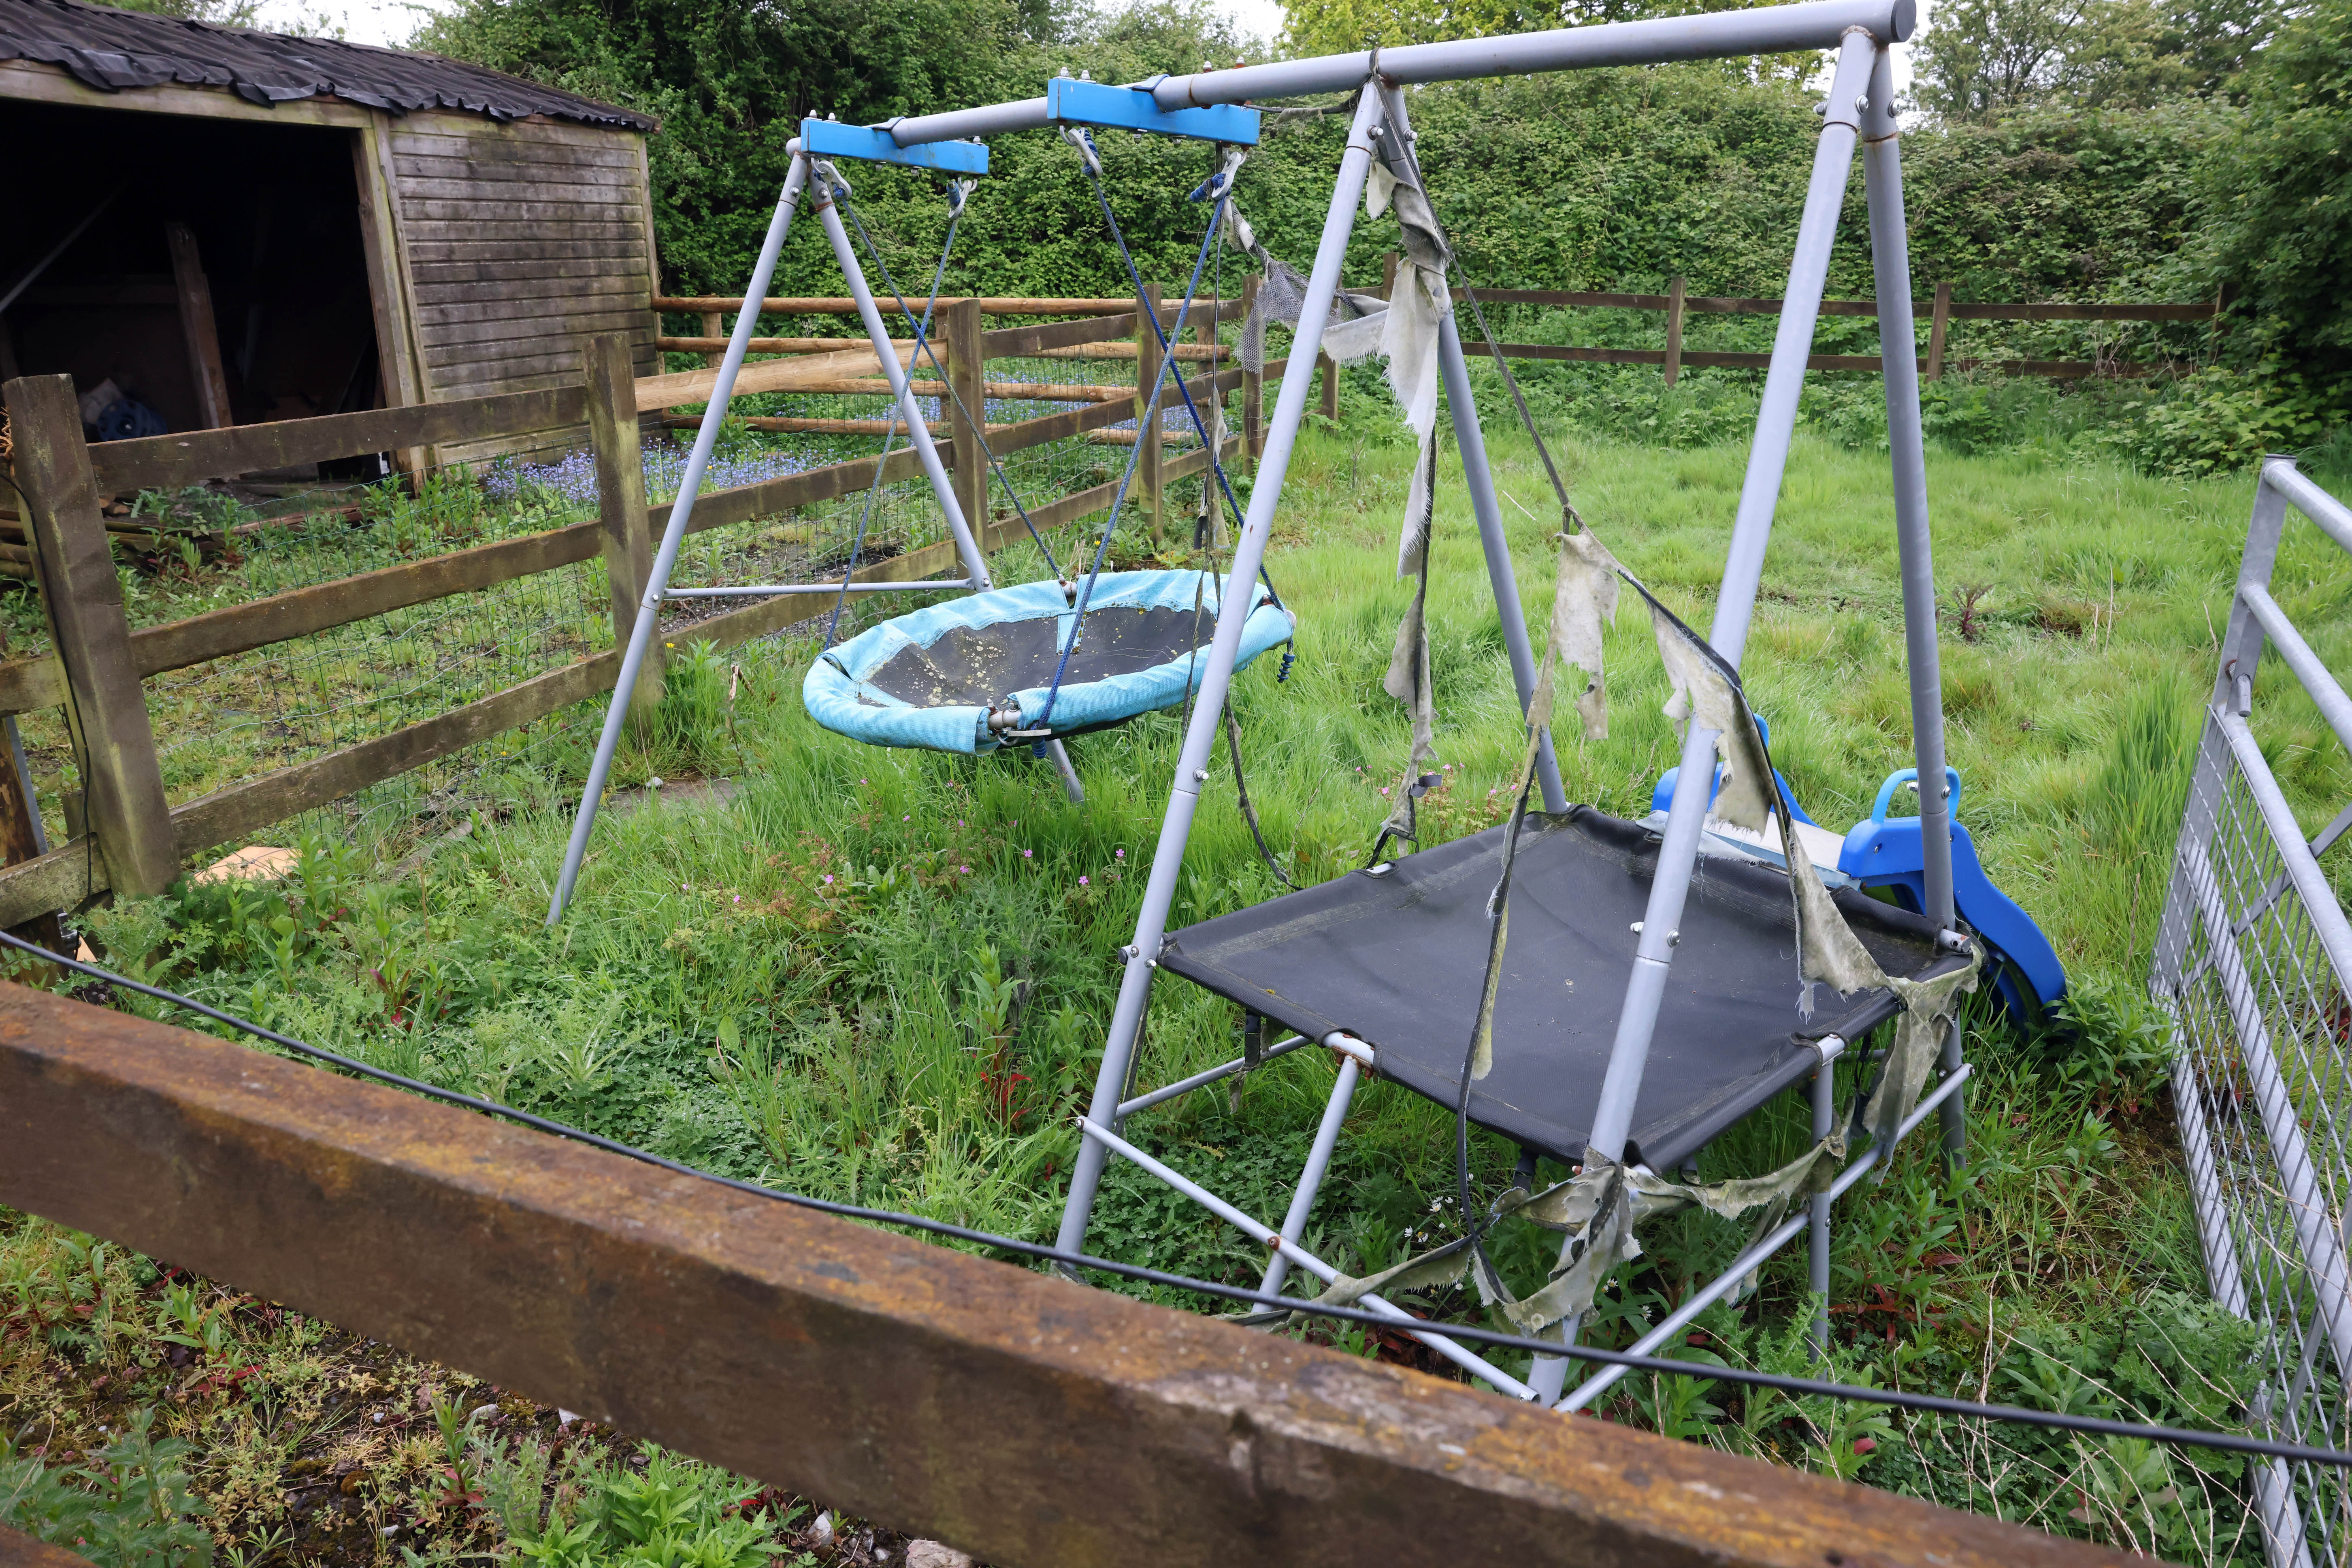 Newport City Council has requested an unused swing is also moved to another area